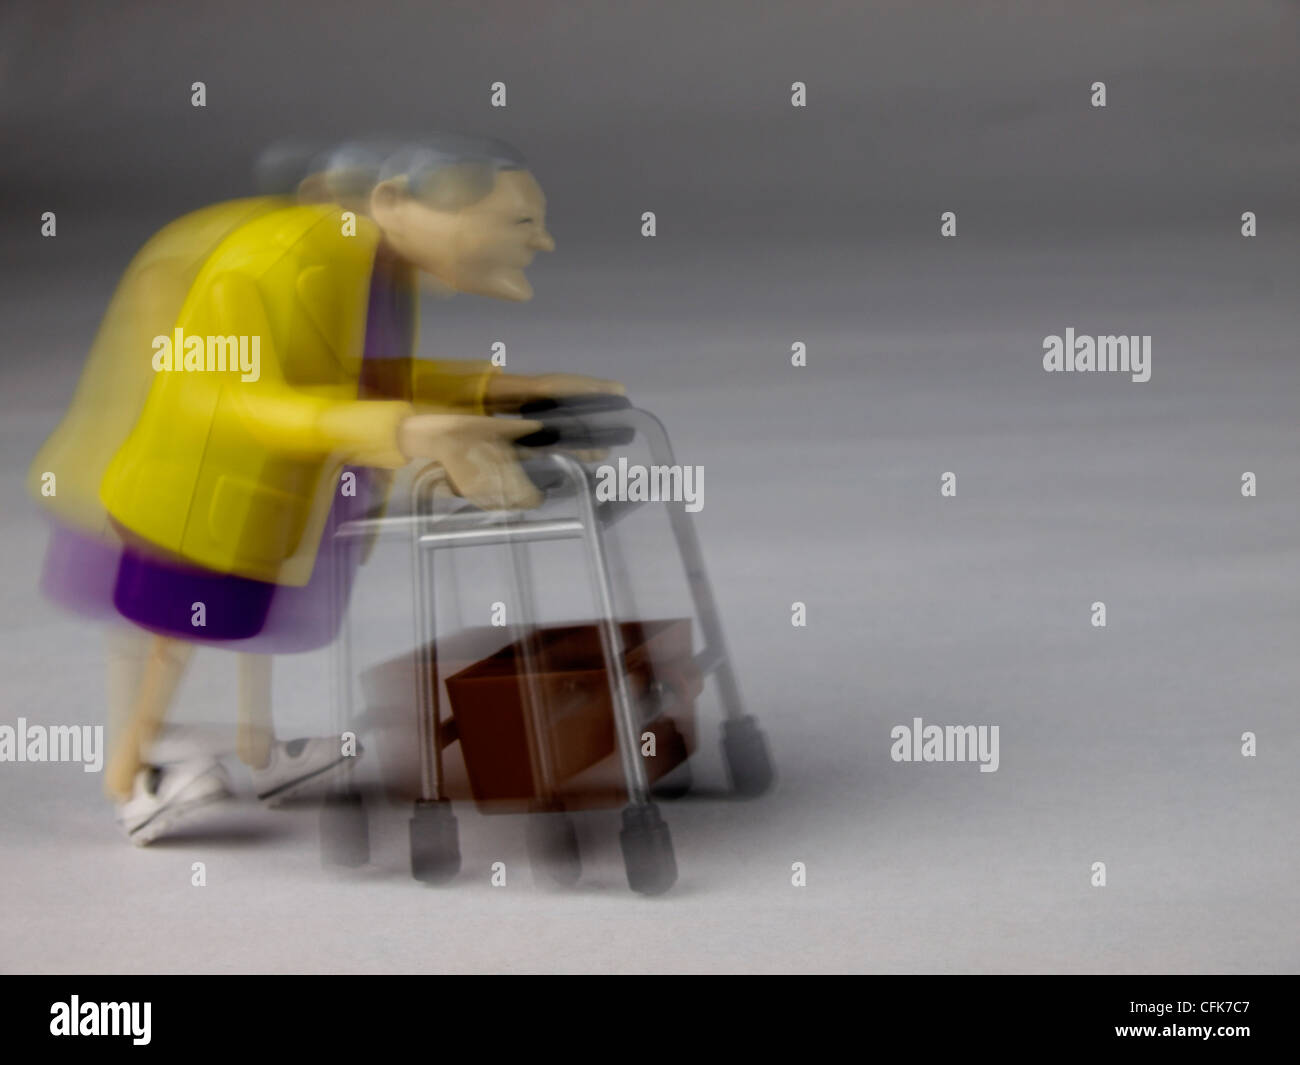 Racing Granny, with motion blur Banque D'Images